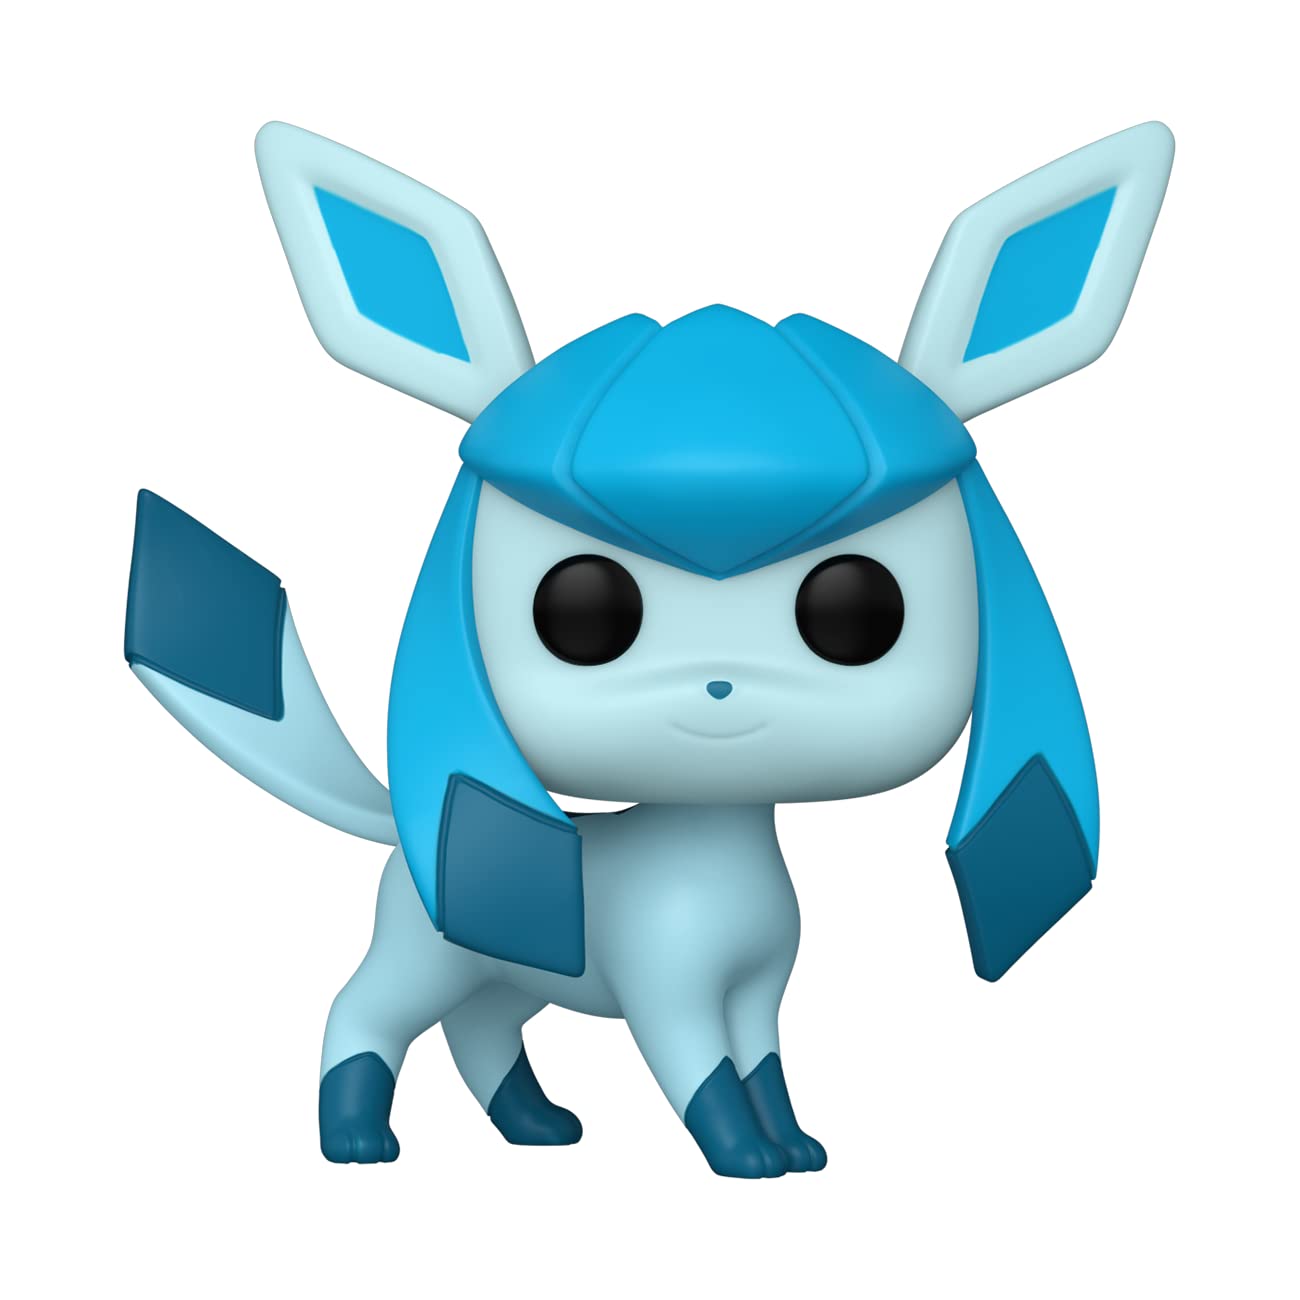 POP! Glaceon